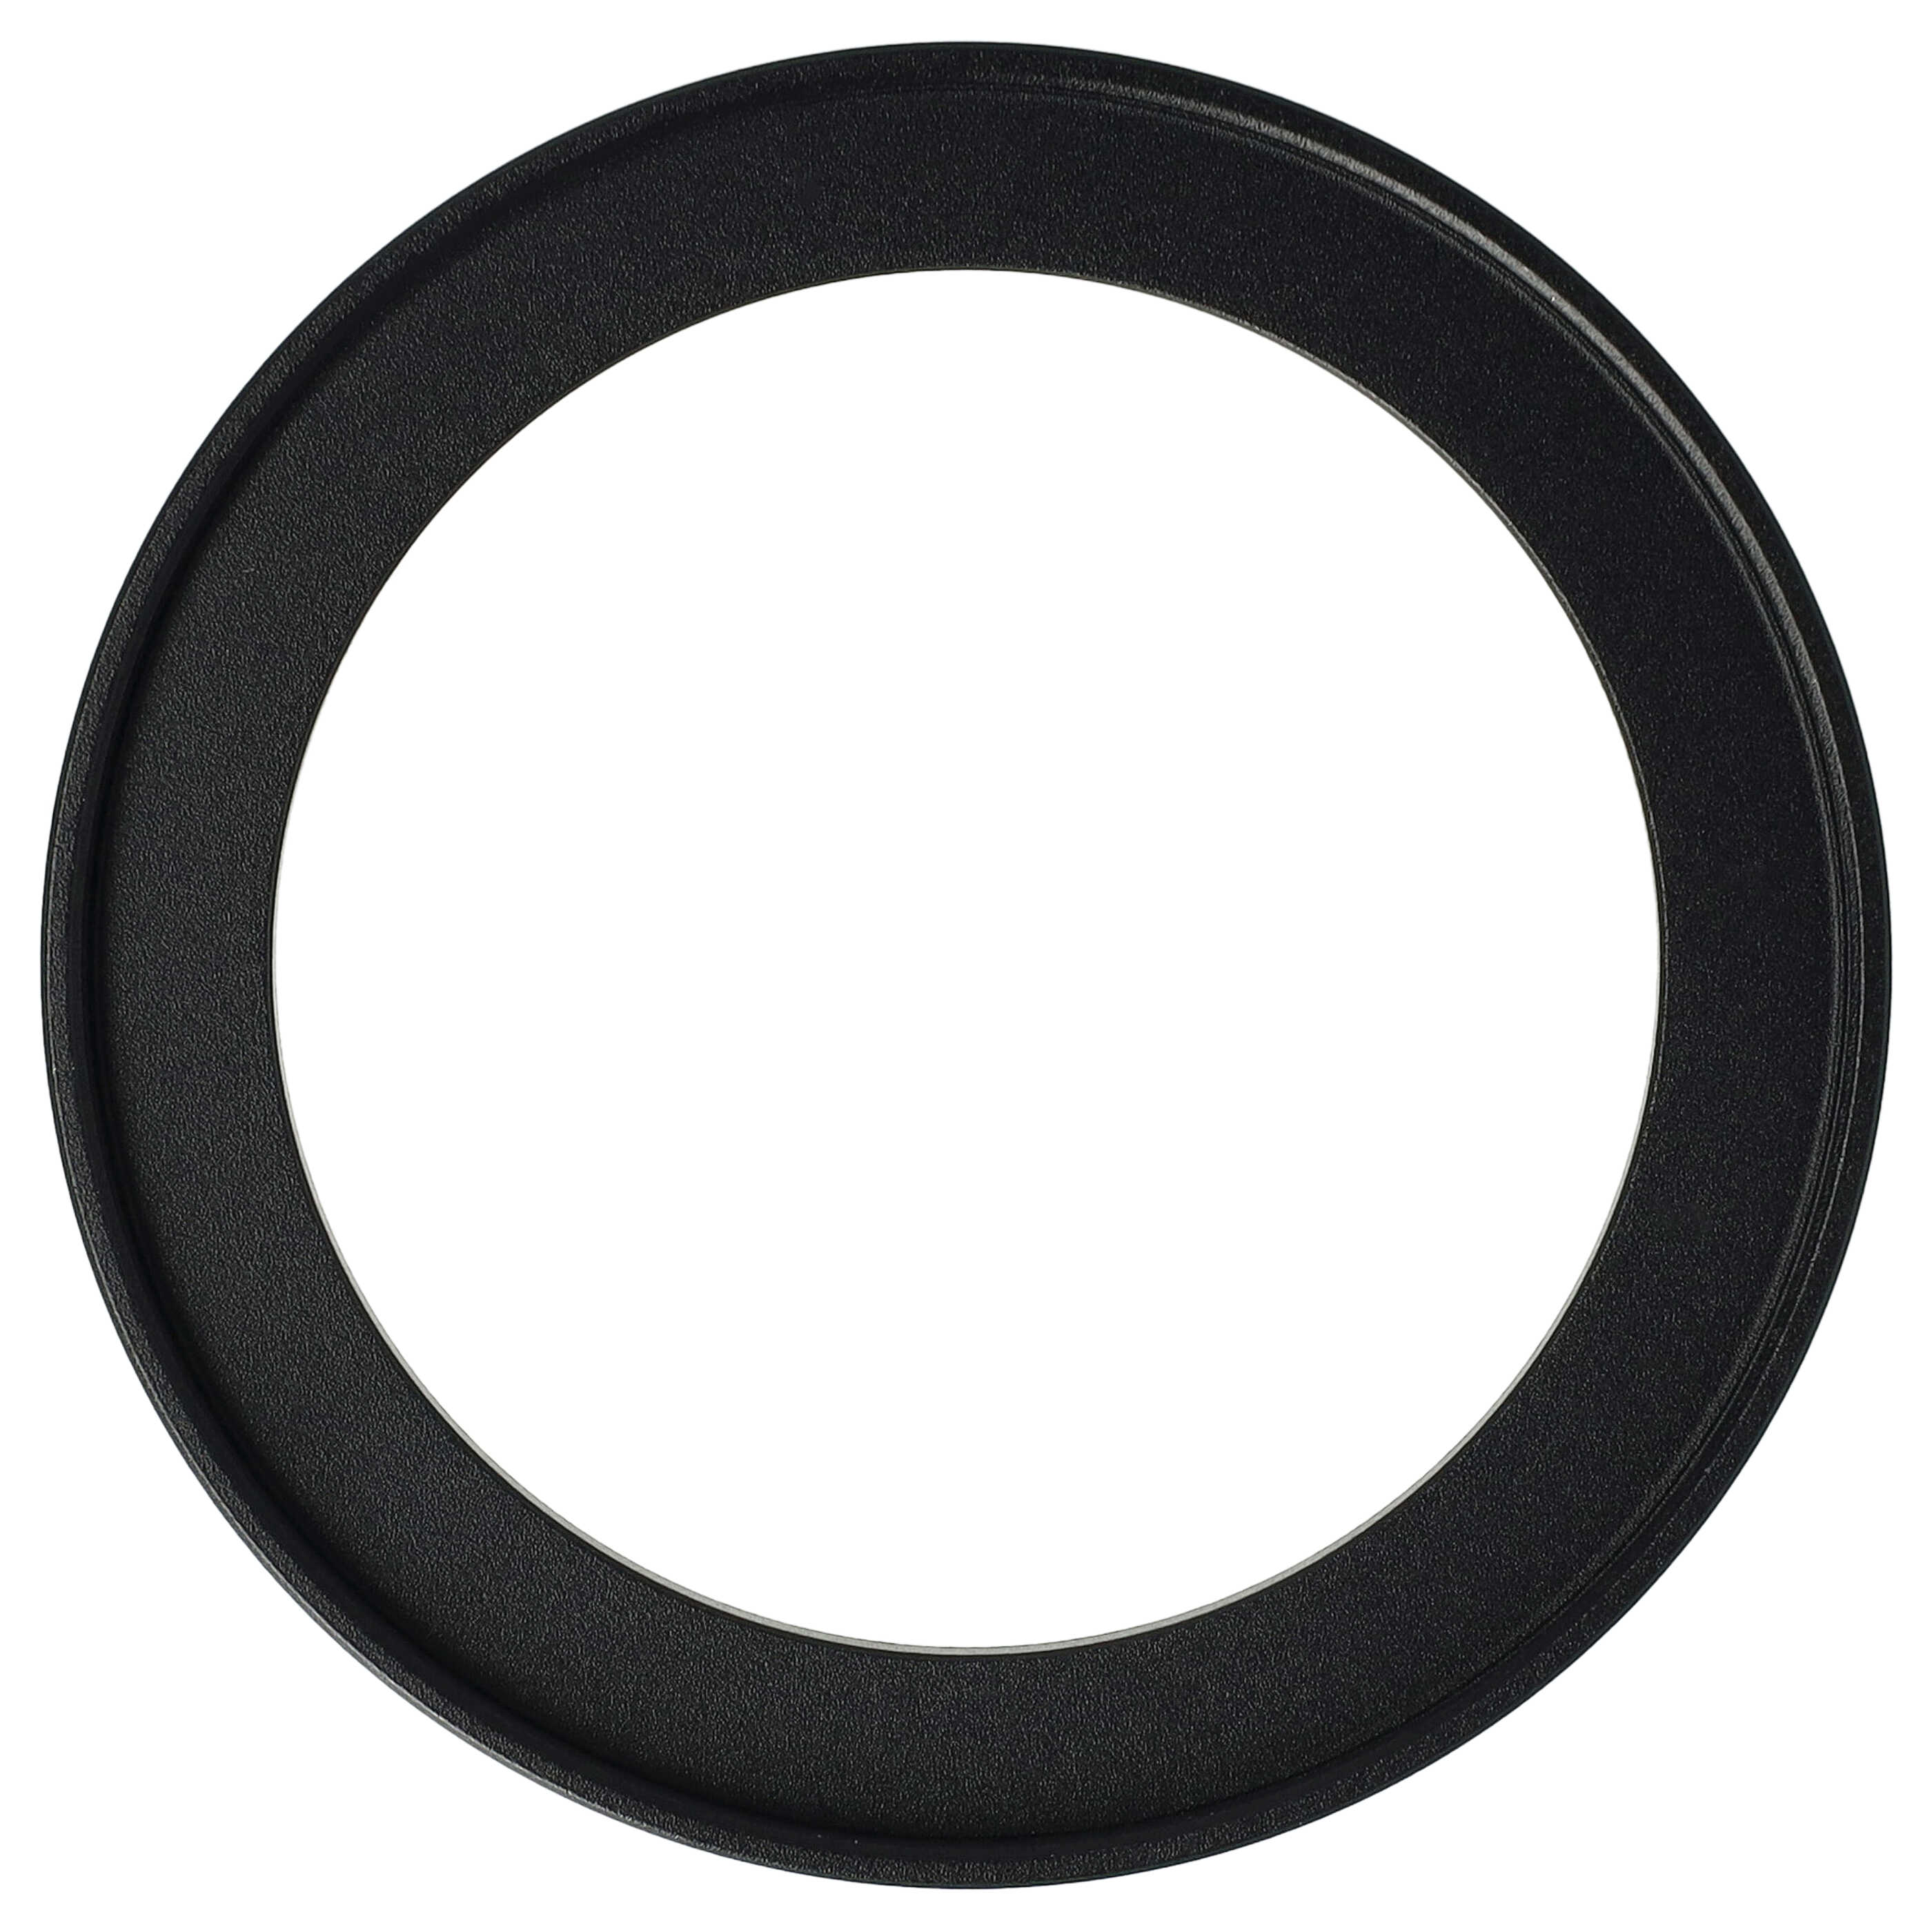 Step-Up Ring Adapter of 55 mm to 67 mmfor various Camera Lens - Filter Adapter